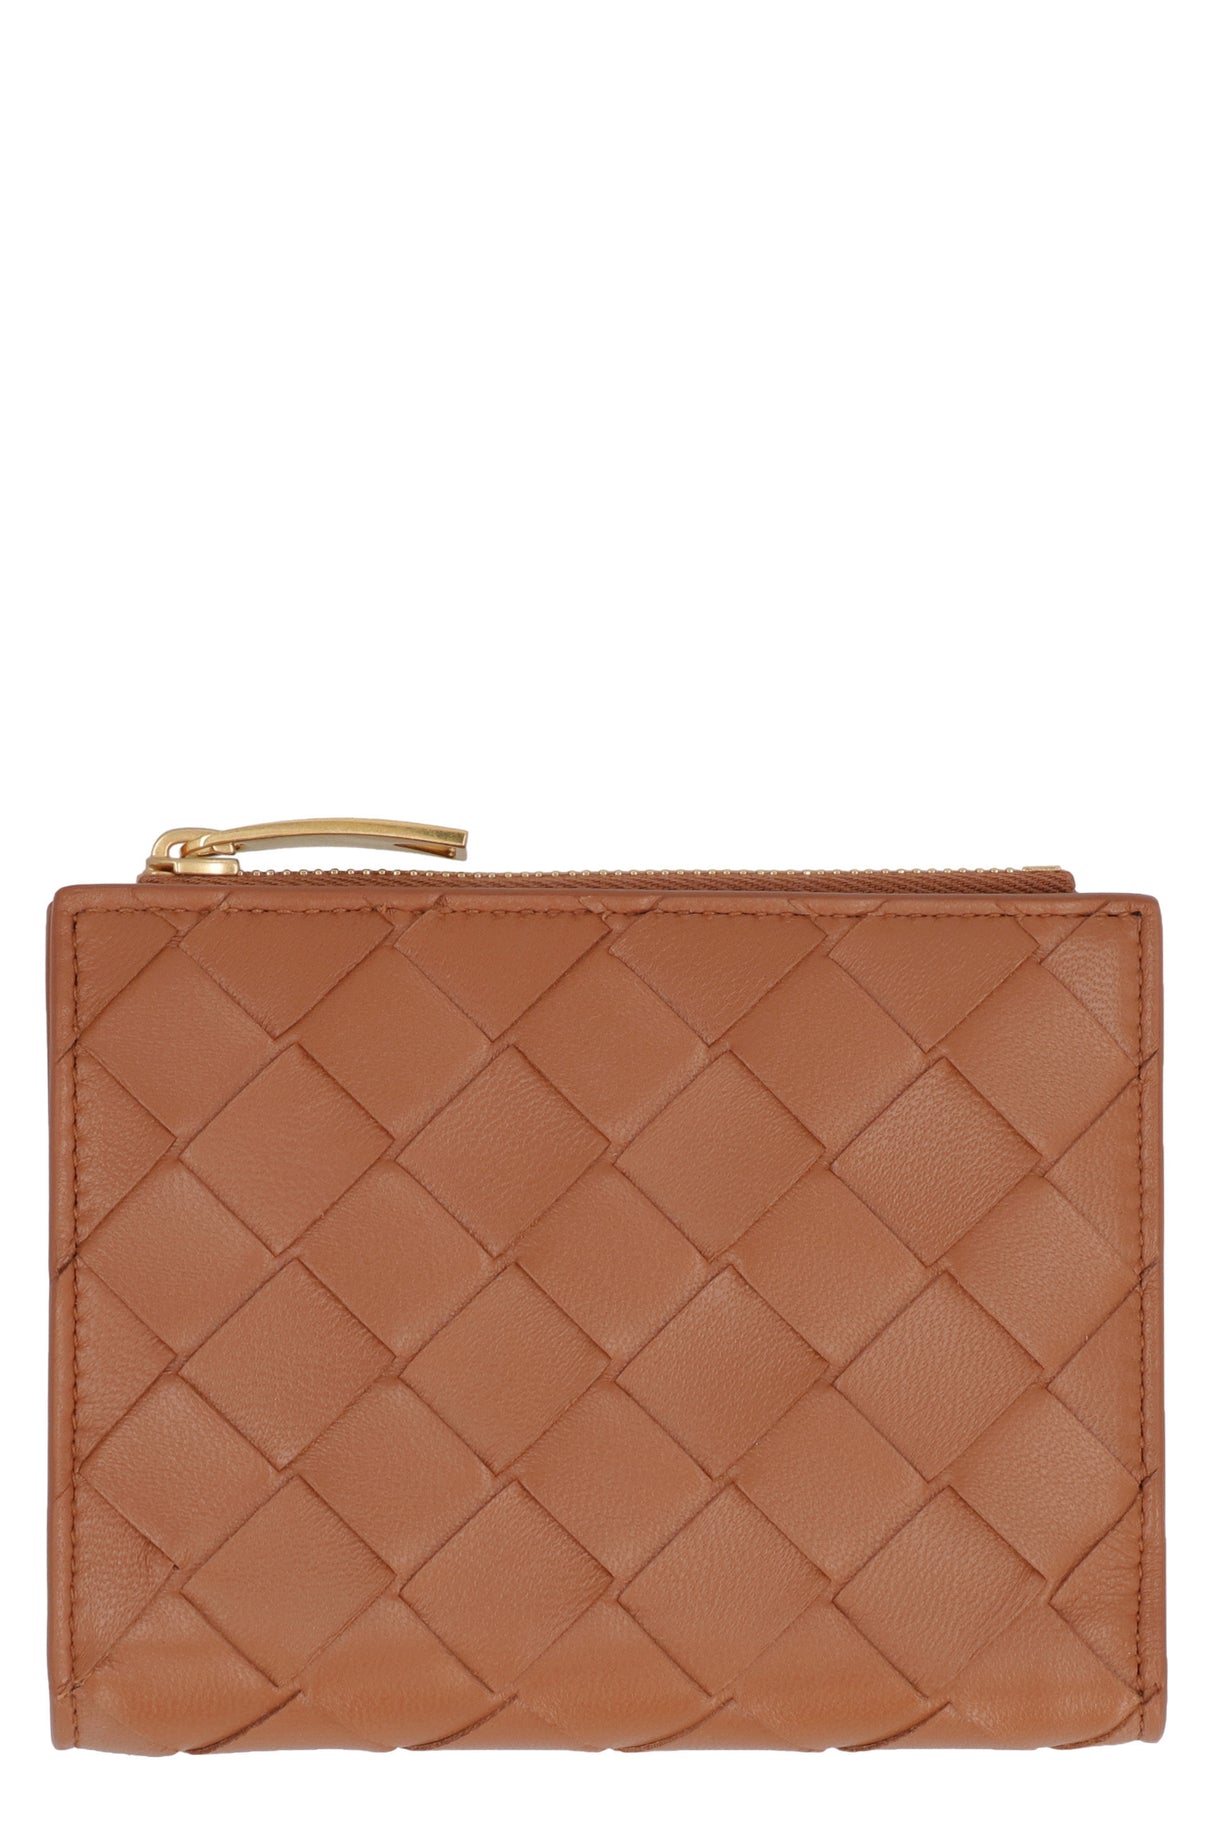 BOTTEGA VENETA Luxurious Bifold Wallet made with Nappa Leather for Women in Warm Brown